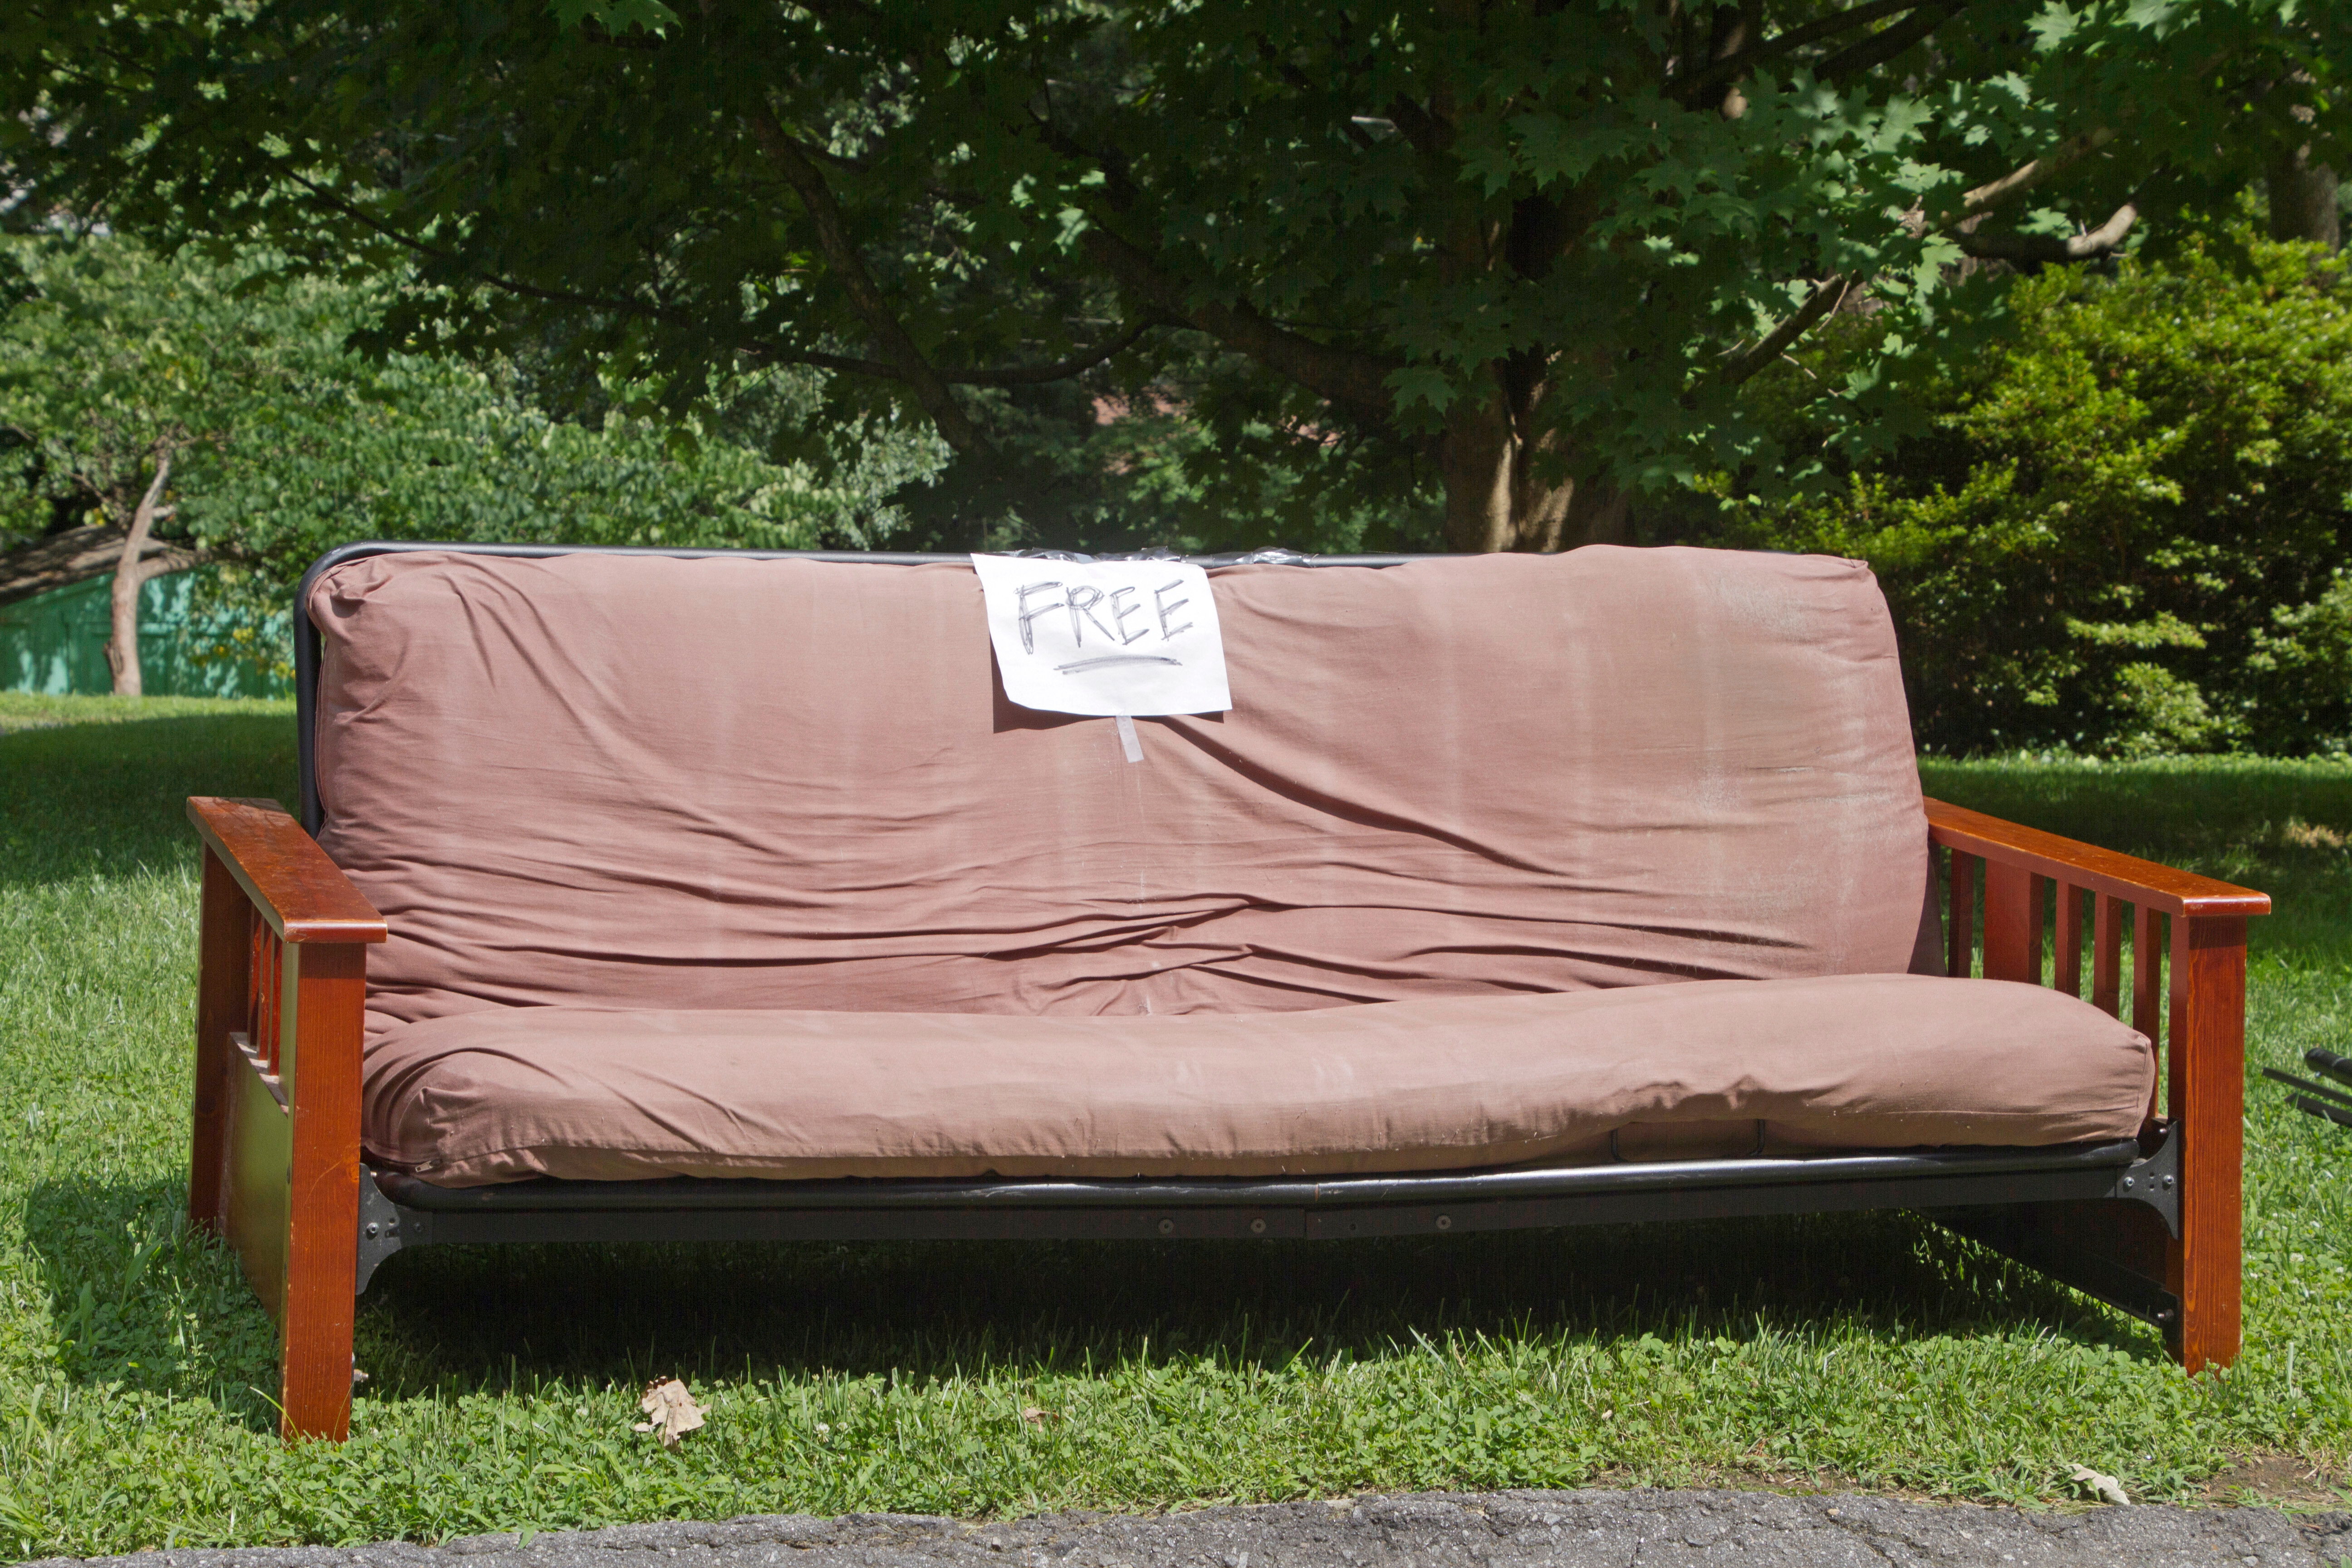 A used futon couch or bed with a free sign left by the street curb to be given away